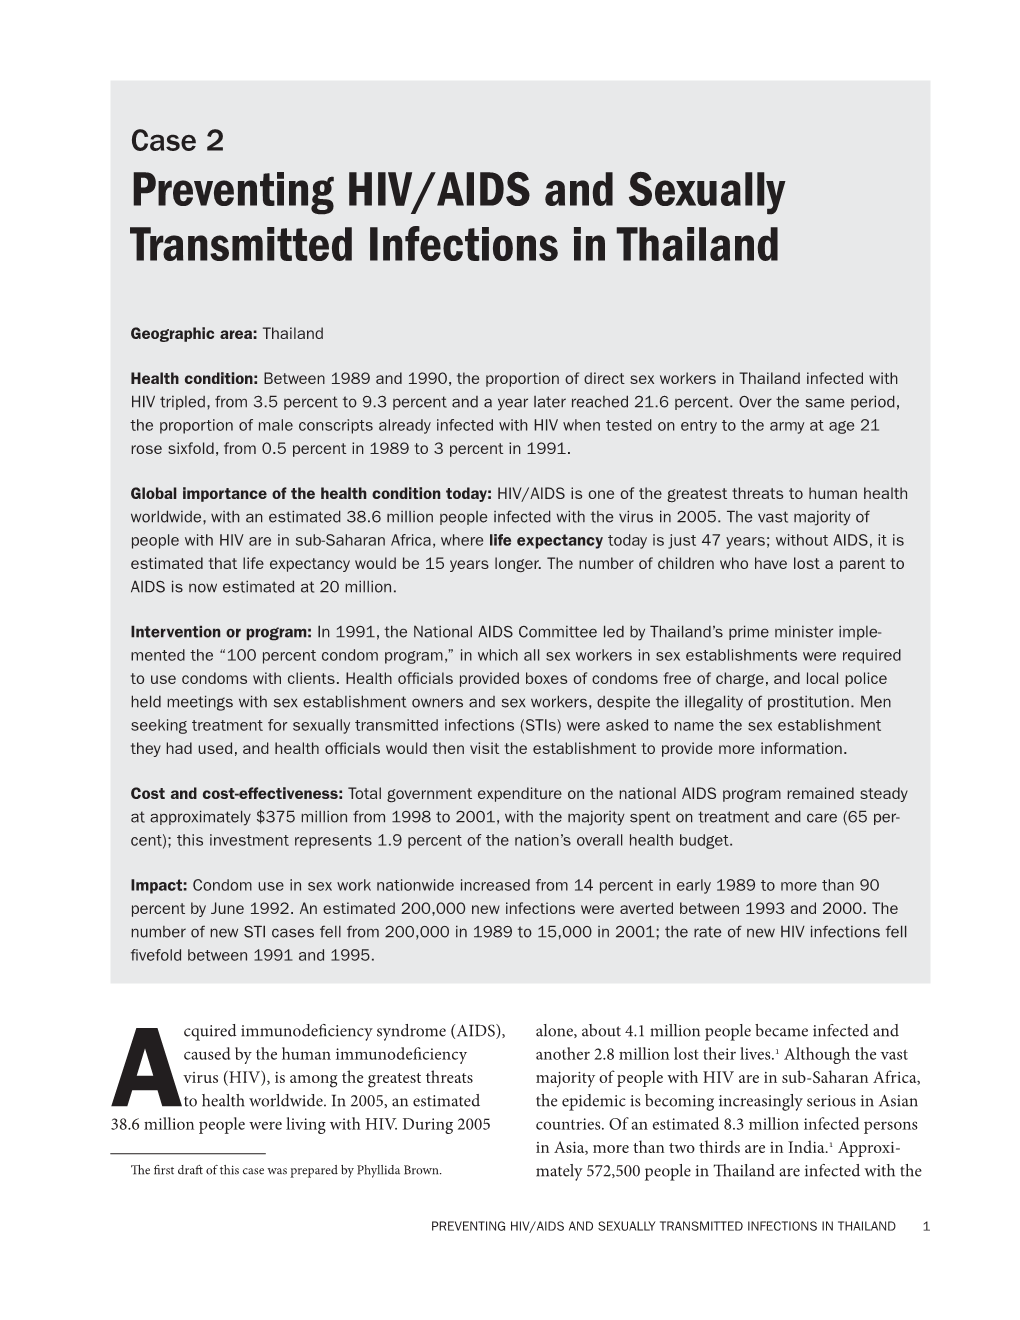 Preventing HIV/AIDS and Sexually Transmitted Infections in Thailand